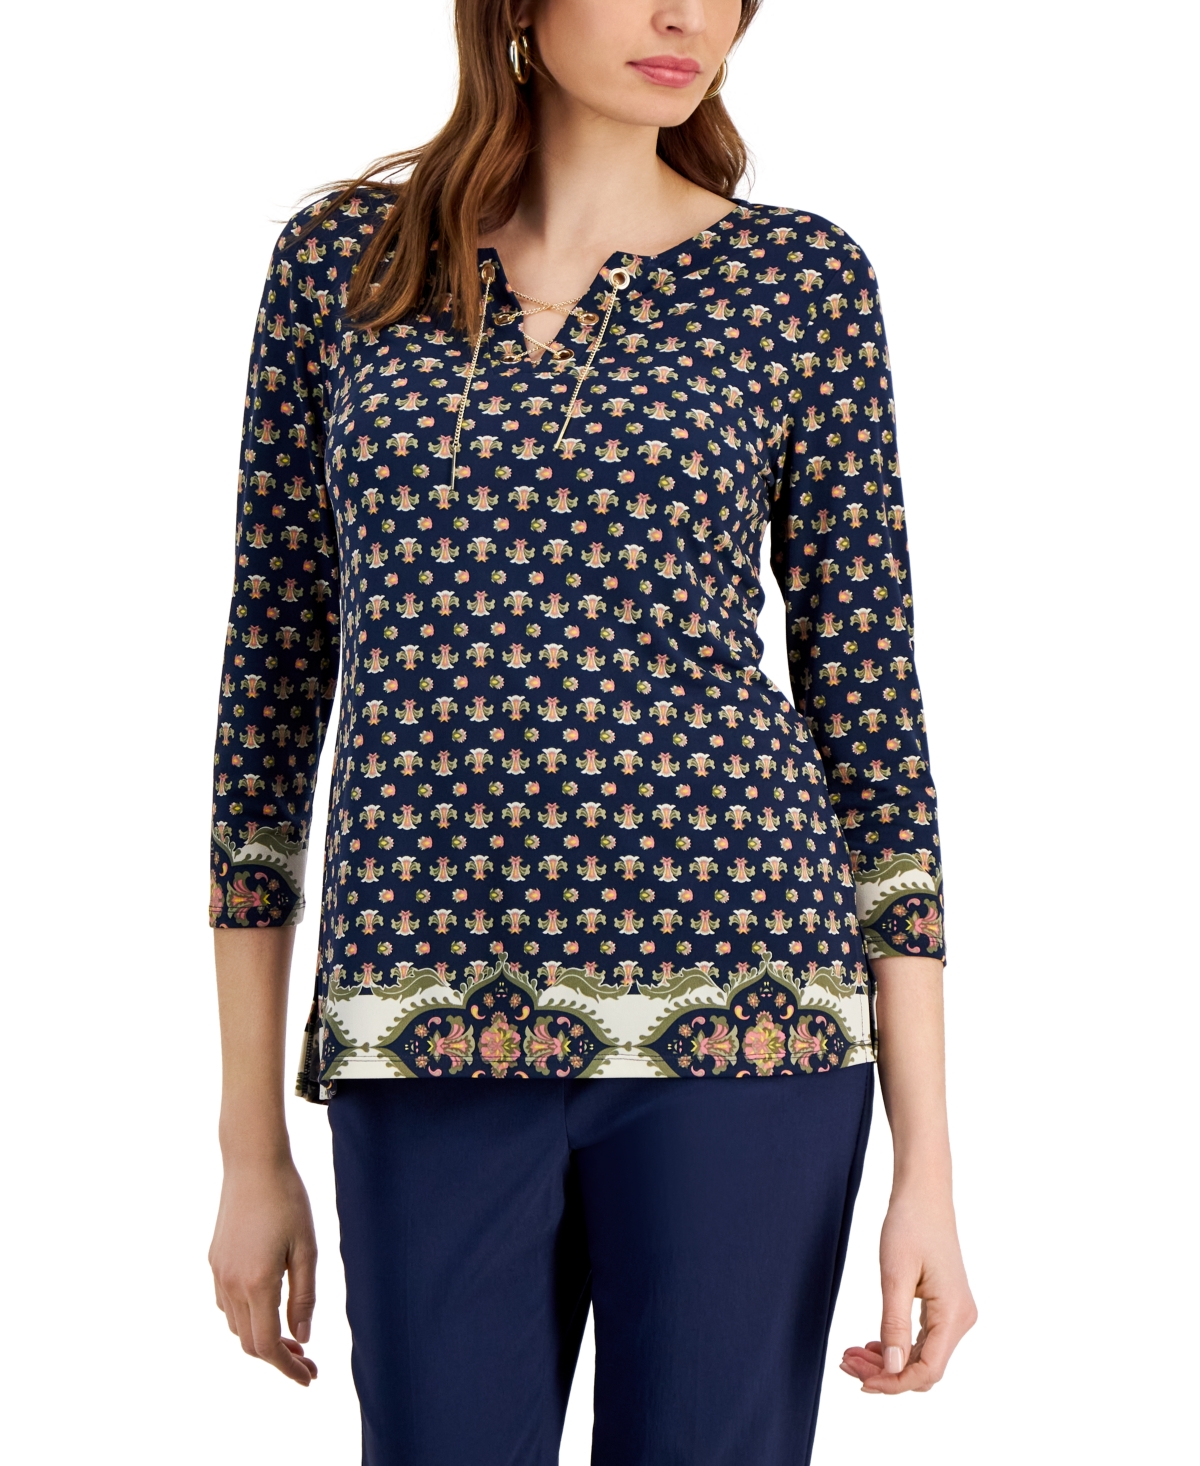 Women's Chain Lace-Up Border-Print Tunic, Created for Macy's - Intrepid Blue Combo